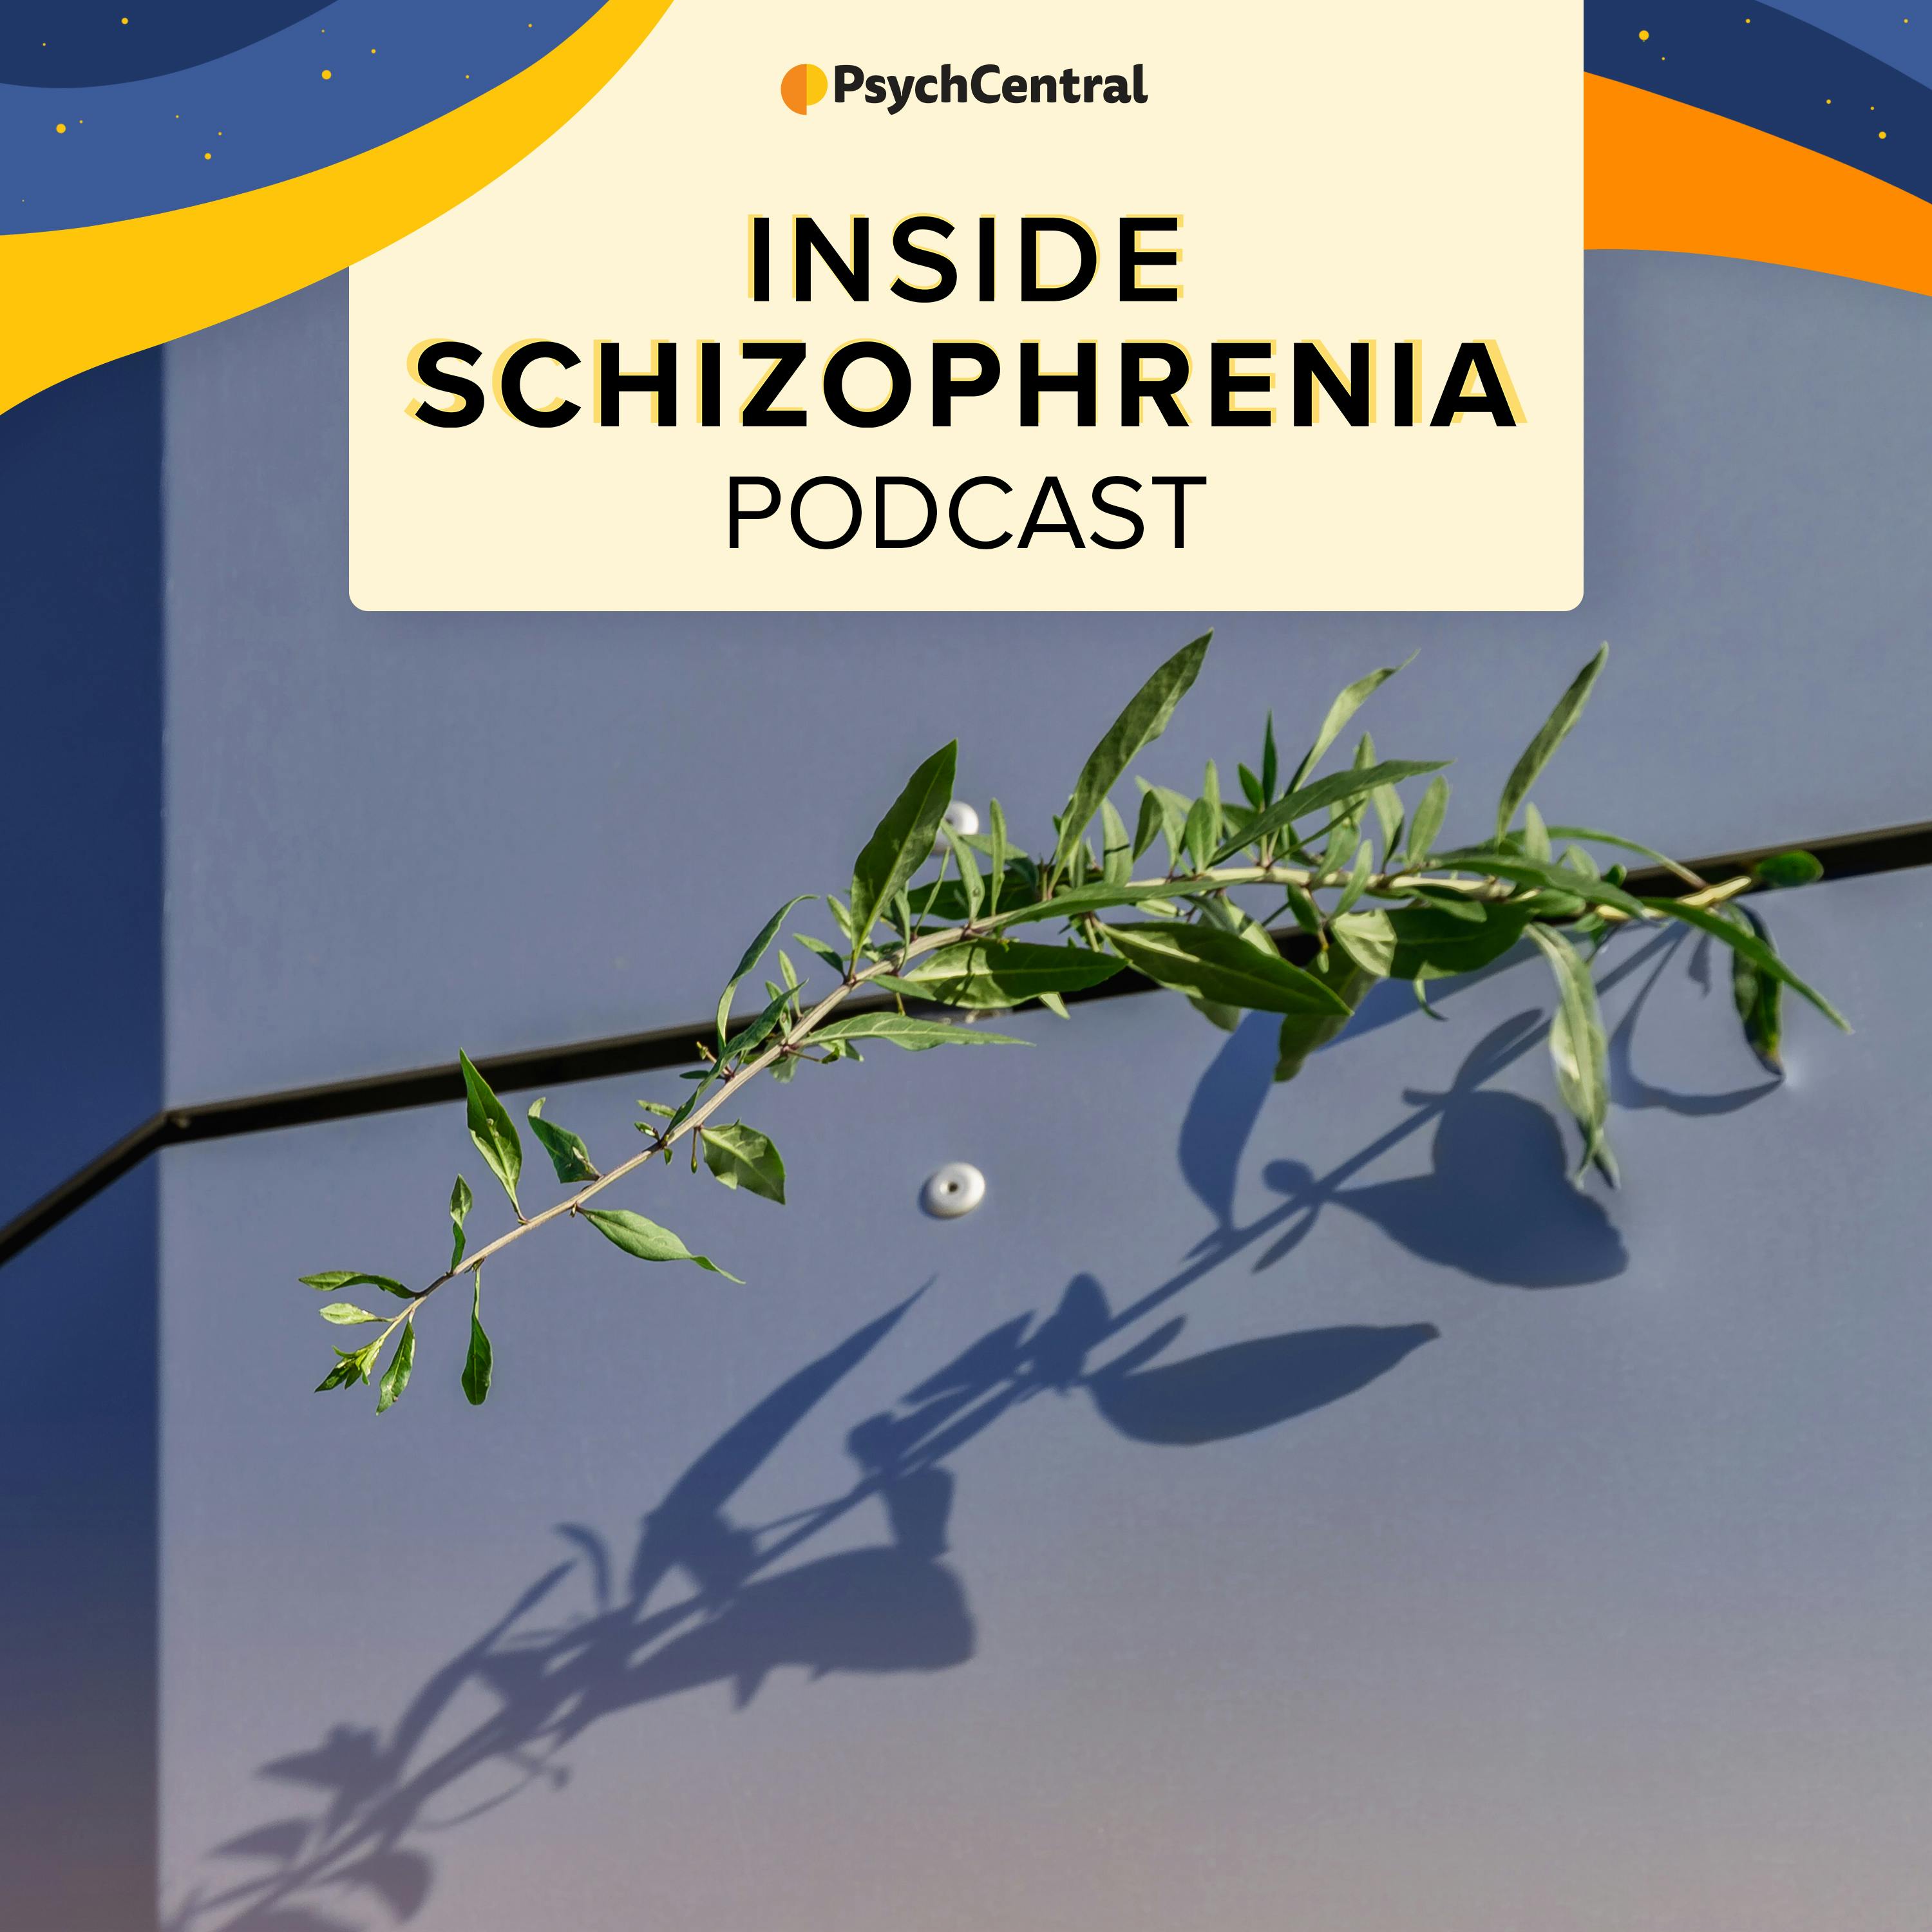 What is Psychological Resilience in Schizophrenia?